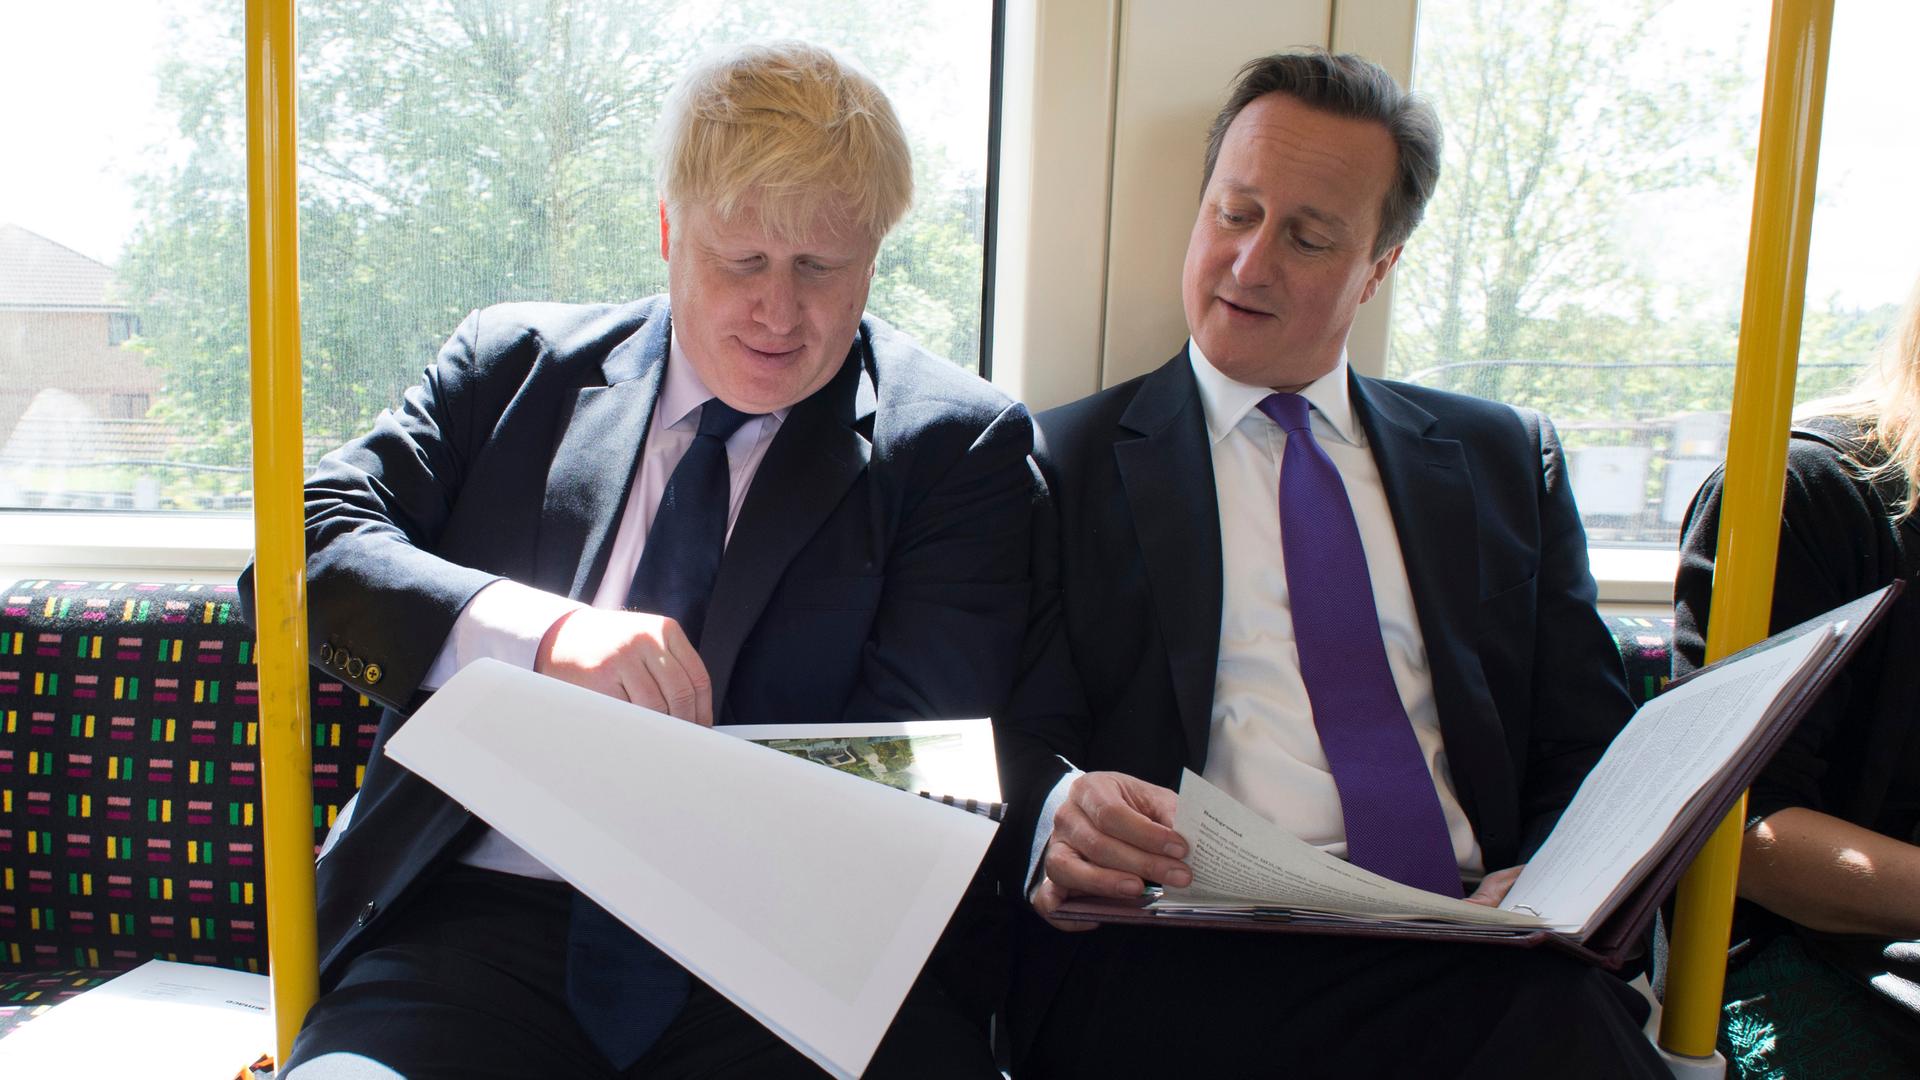 London Mayor Boris Johnson and Prime Minister David Cameron have been schoolmates, political colleagues, and are now rivals in a battle of Britain's future in Europe. 